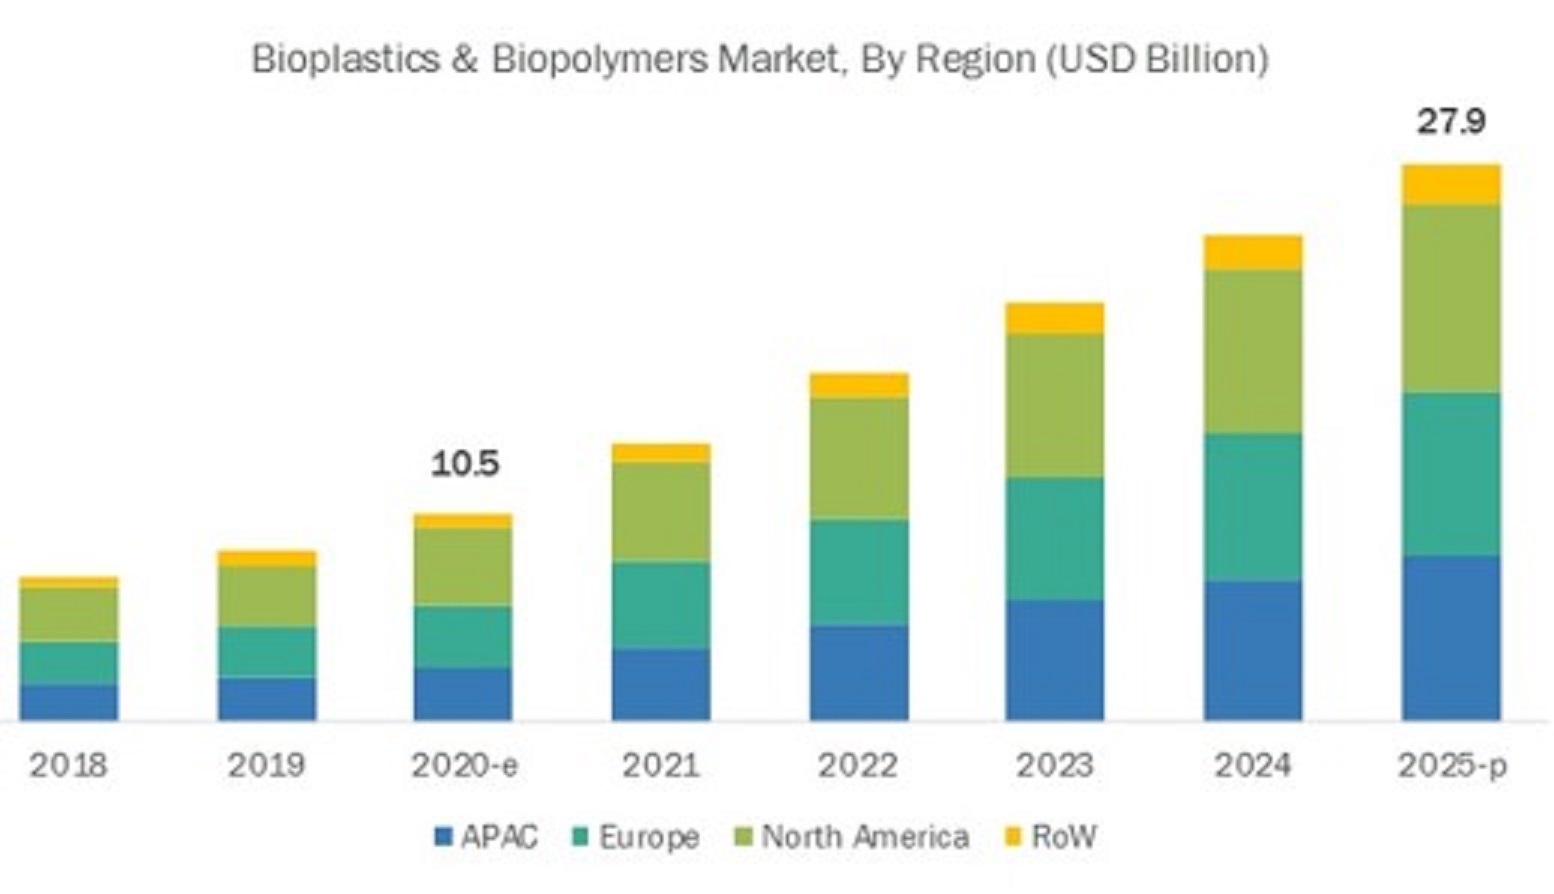 The biopolymer market is expected to grow from US$10.5 billion in 2020 to US$ 27.9 billion in 2025.